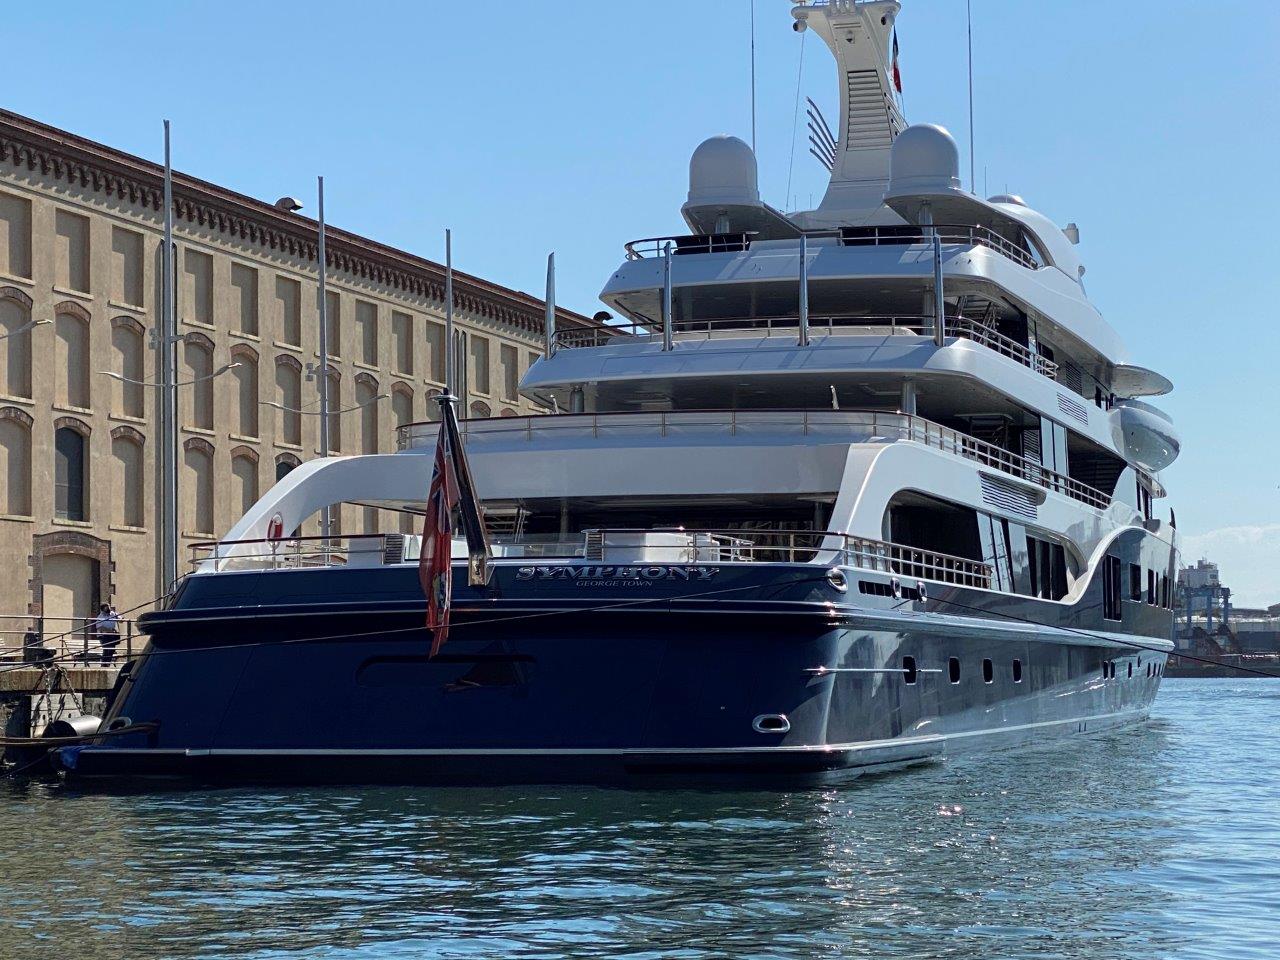 Bernard Arnault's Symphony Yacht is the Largest Feadship to be